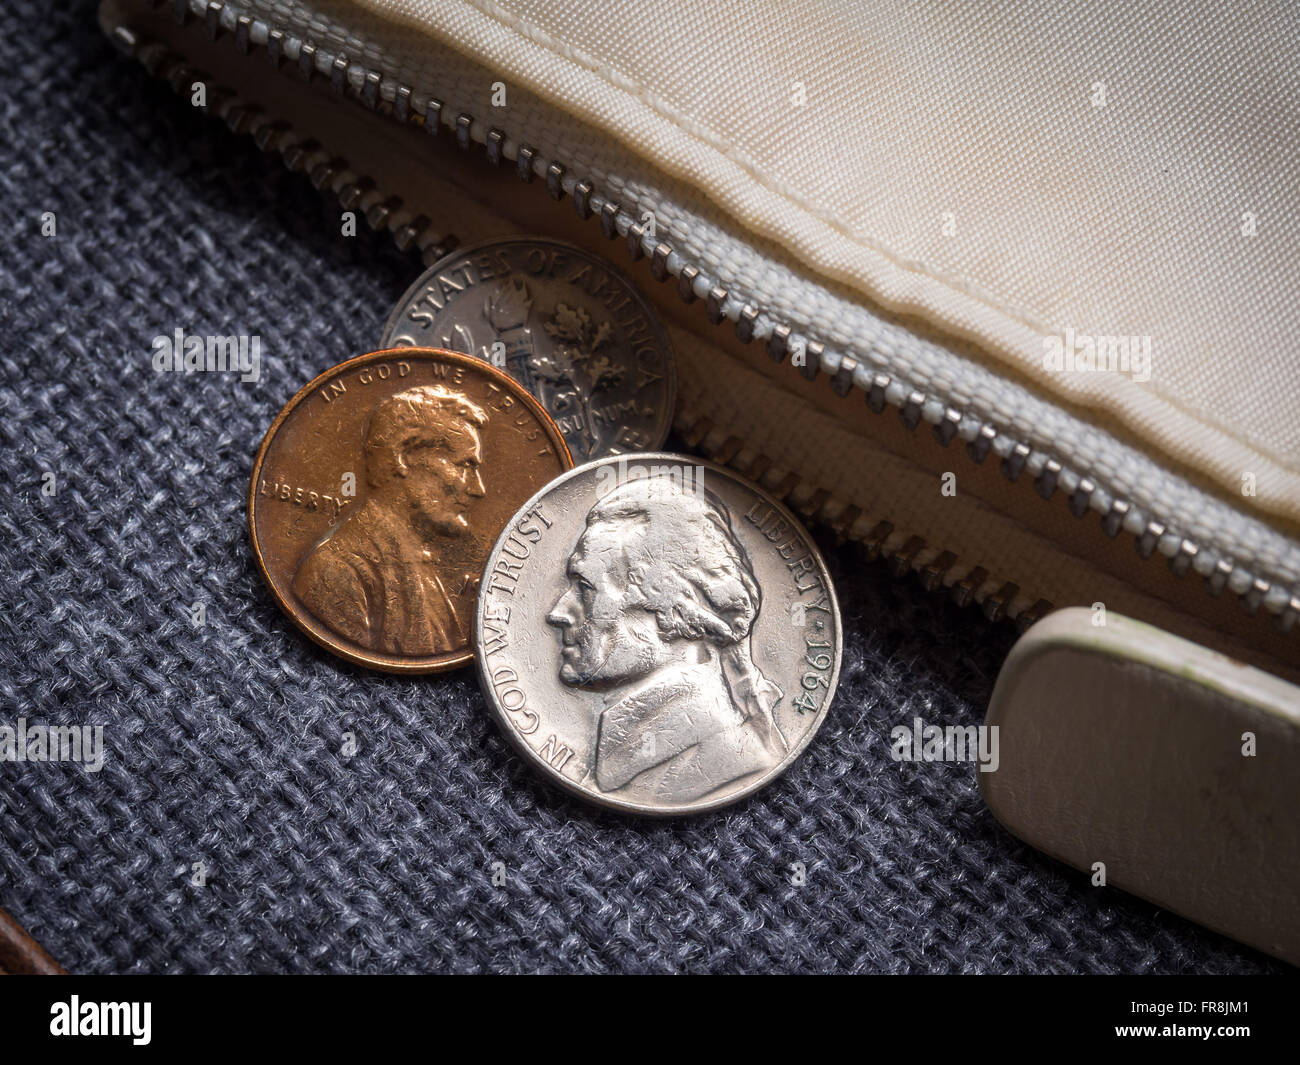 US dollar coins placed outside the wallet. Stock Photo